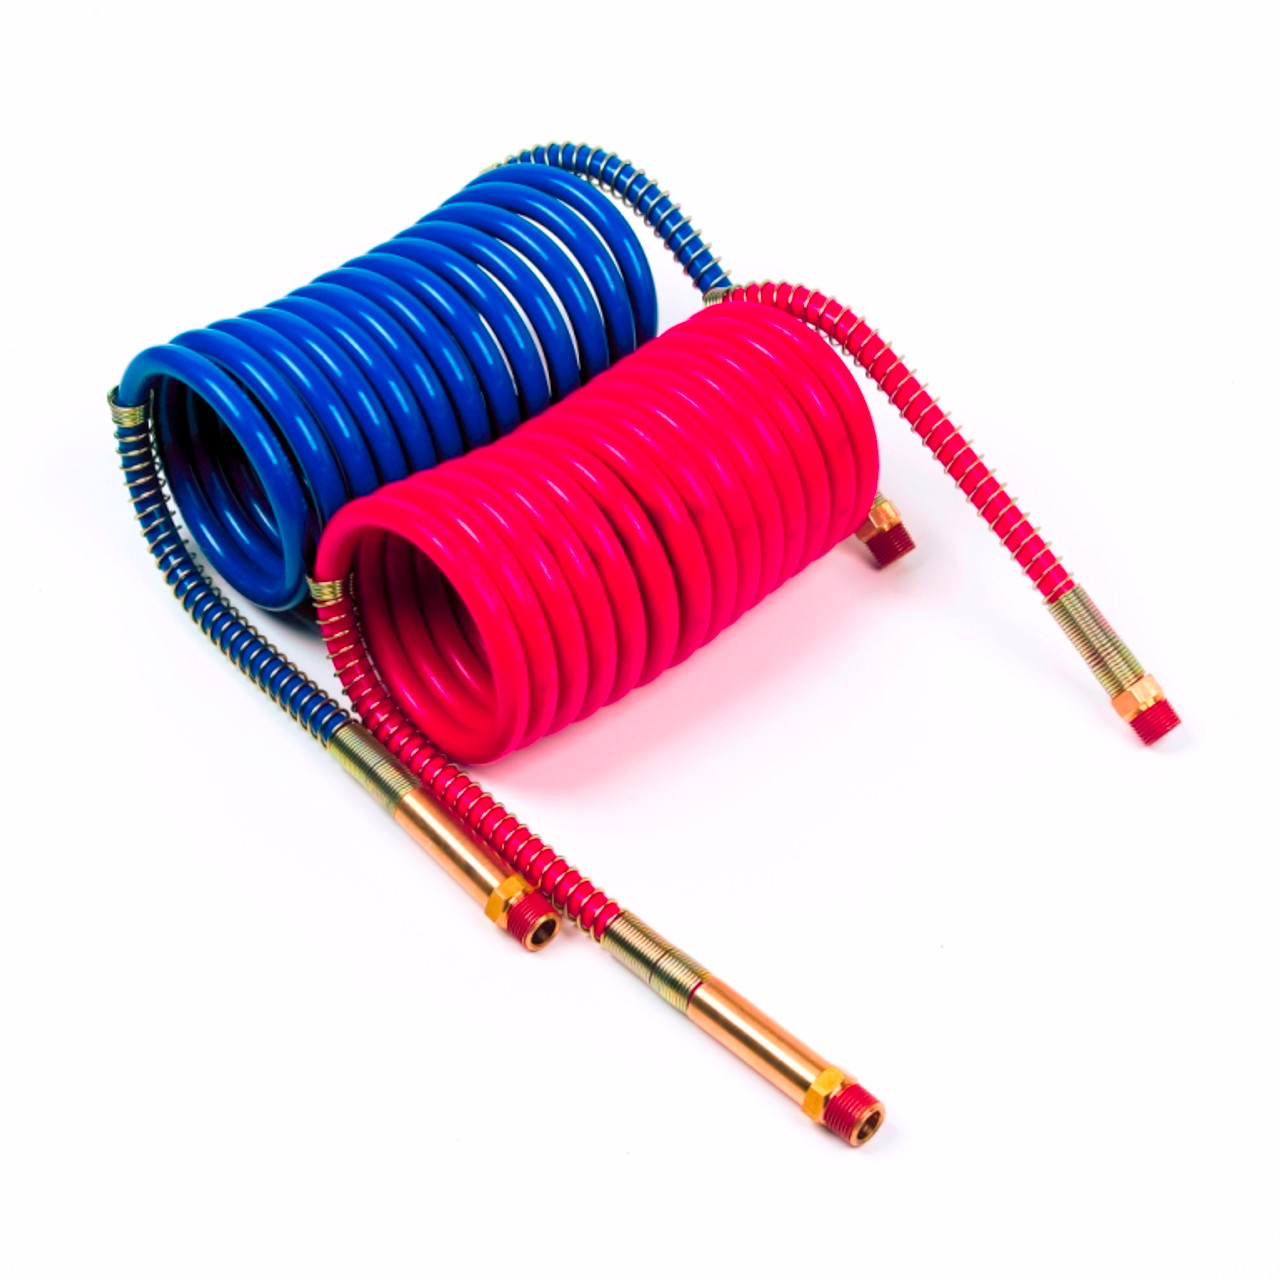 1/2" x 15' @ 2 Pack Red/Blue Low Temp Recoil Air Hose w/Male NPT Fittings  81-0015-C